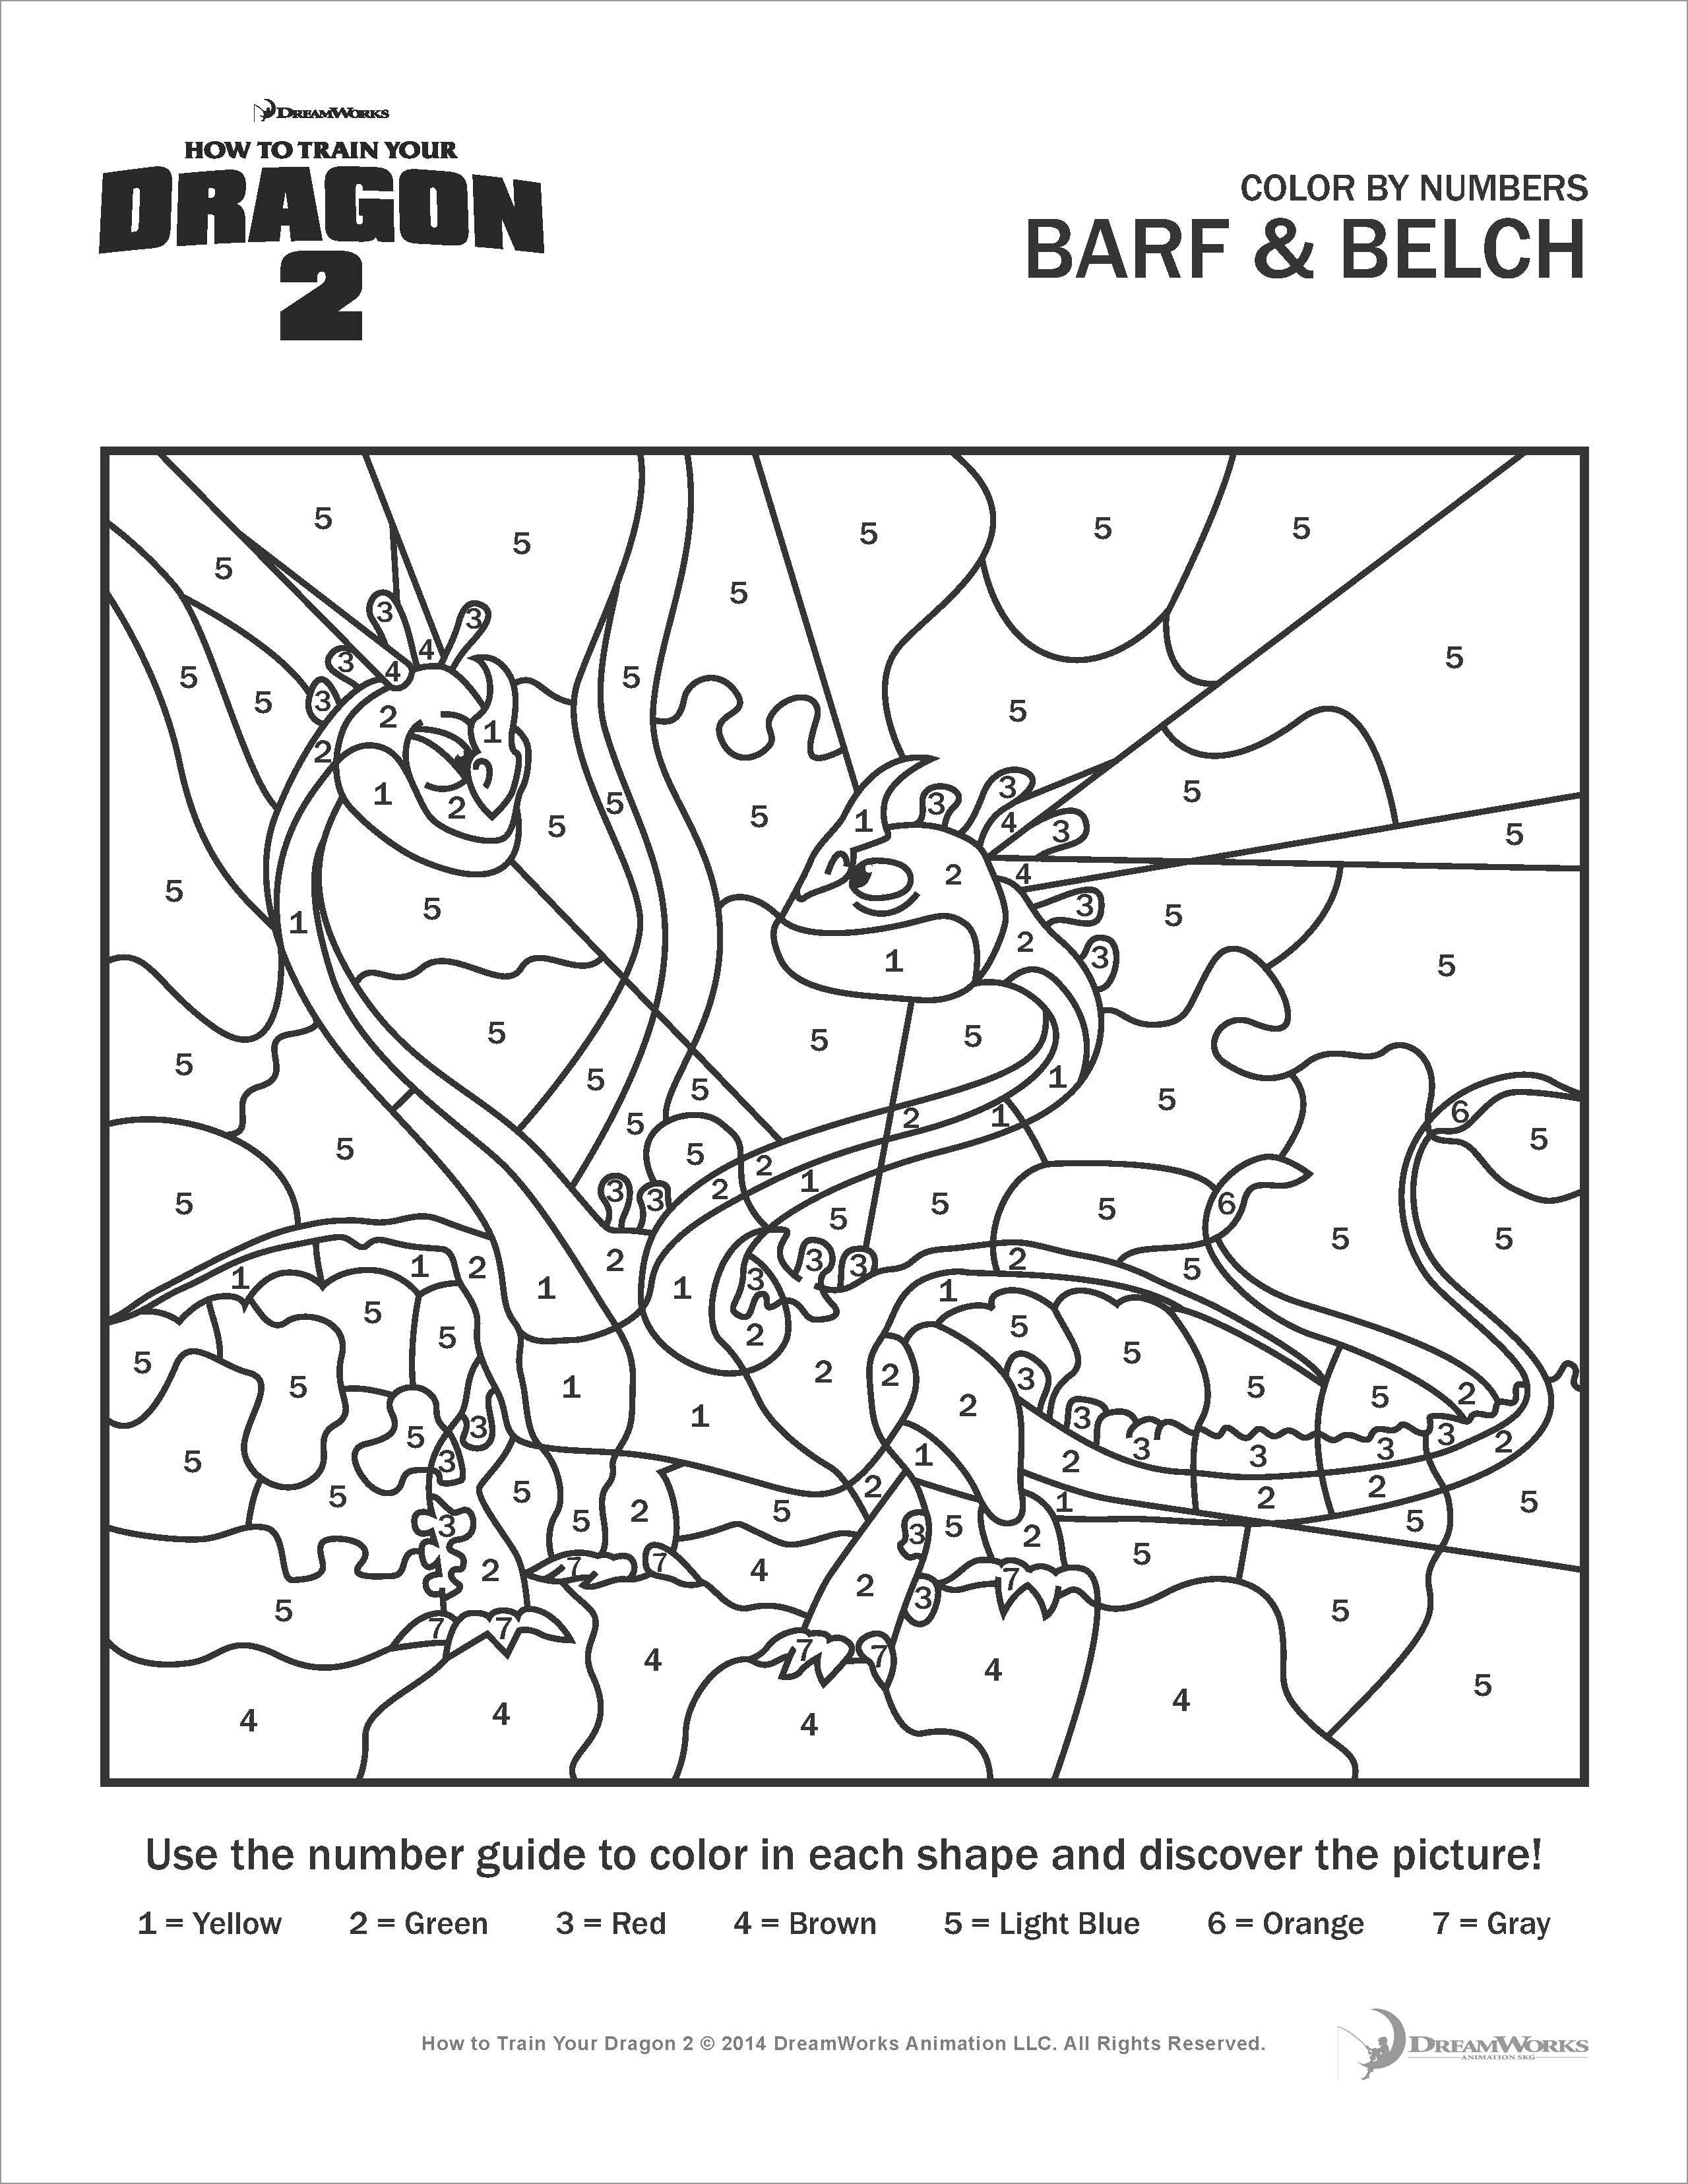 How to Train Your Dragon Barf and Belch Color by Number Coloring Page